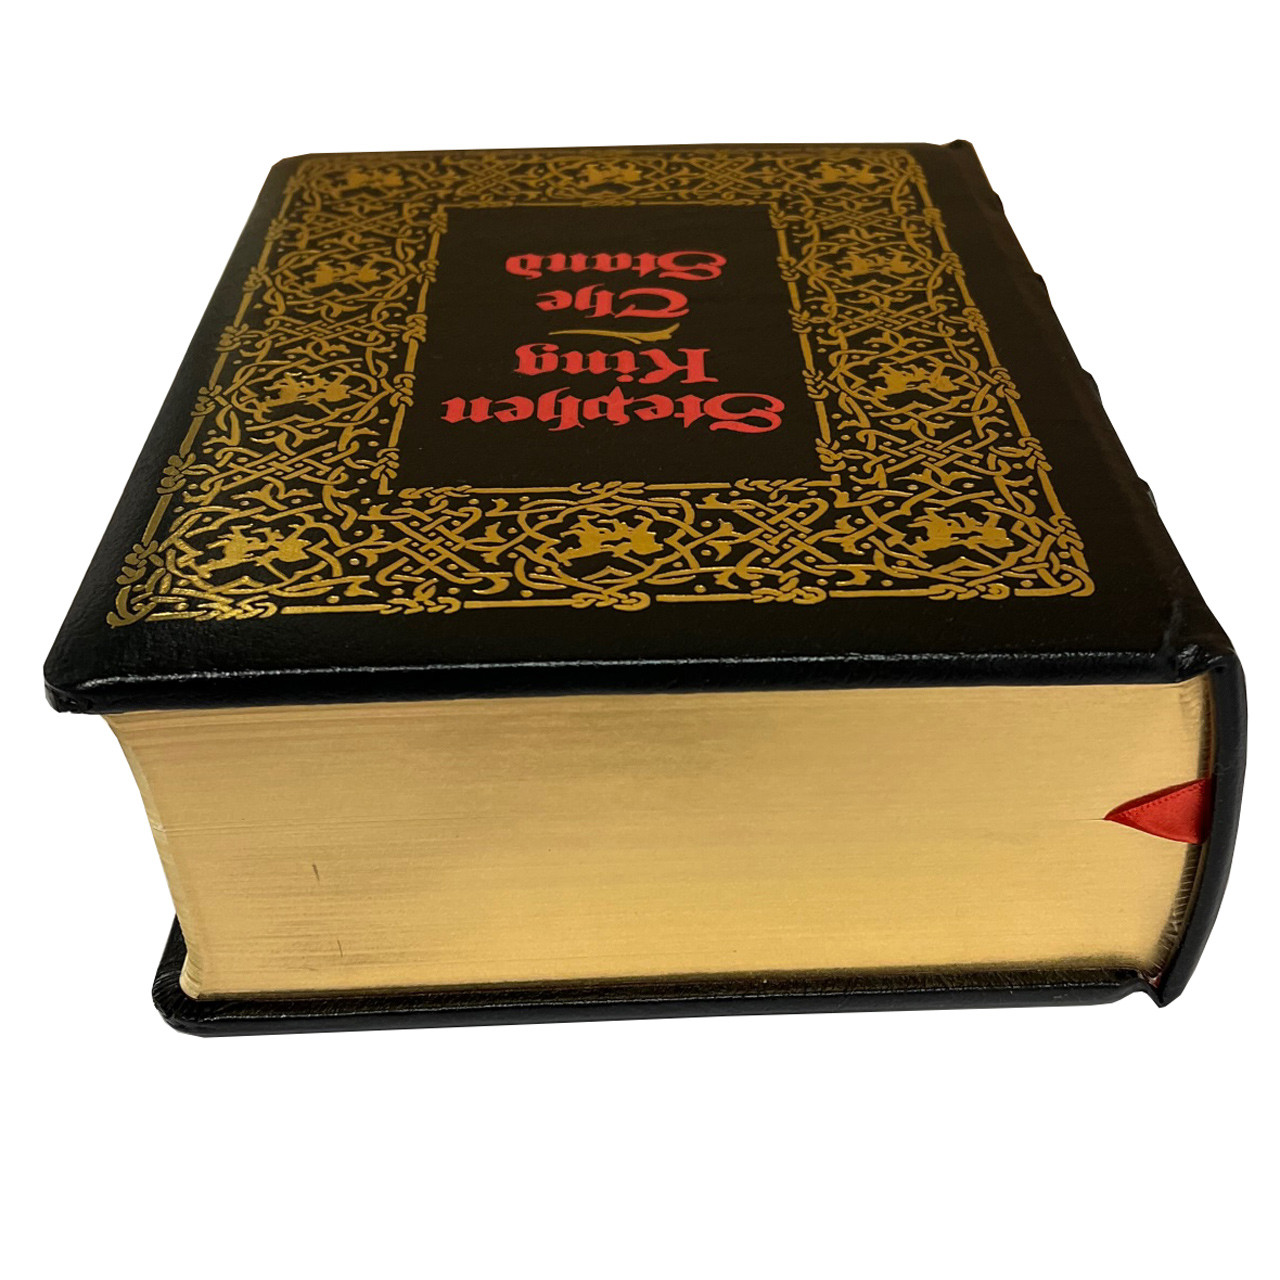 Stephen King "The Stand: The Complete and Uncut Edition" Signed Limited First Edition, Deluxe Leather Bound "Coffin" Bible No. 598 of 1,250 [New in Box]